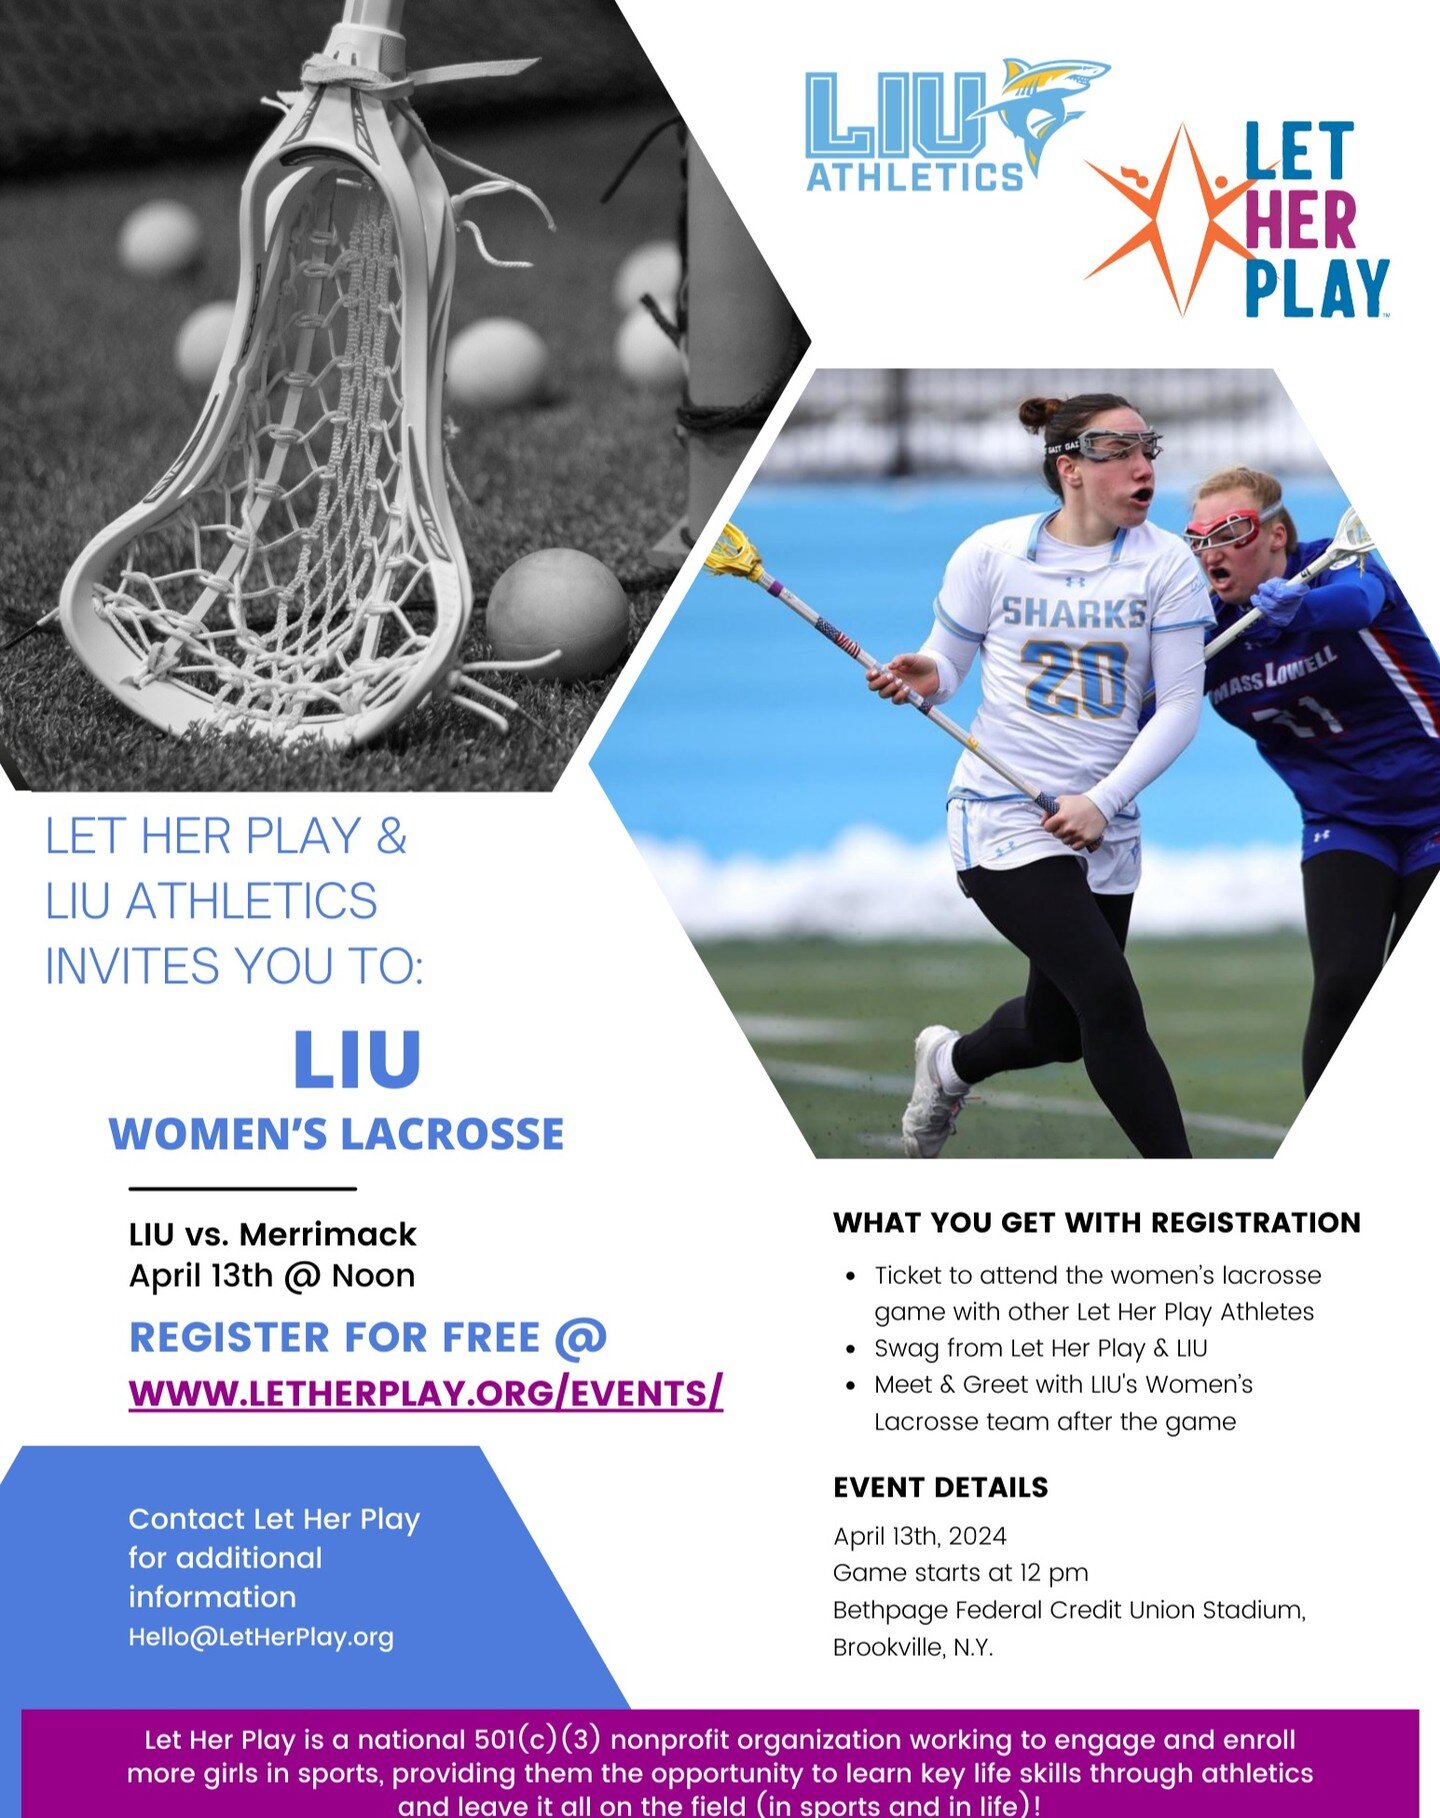 Join Let Her Play and @liuathletics as @liuwlax takes on Merrimack on Saturday, 4/13 at noon.

Register for FREE with Let Her Play to attend the game, meet the LIU team after the game + take home some swag from Let Her Play and LIU Athletics. (link i